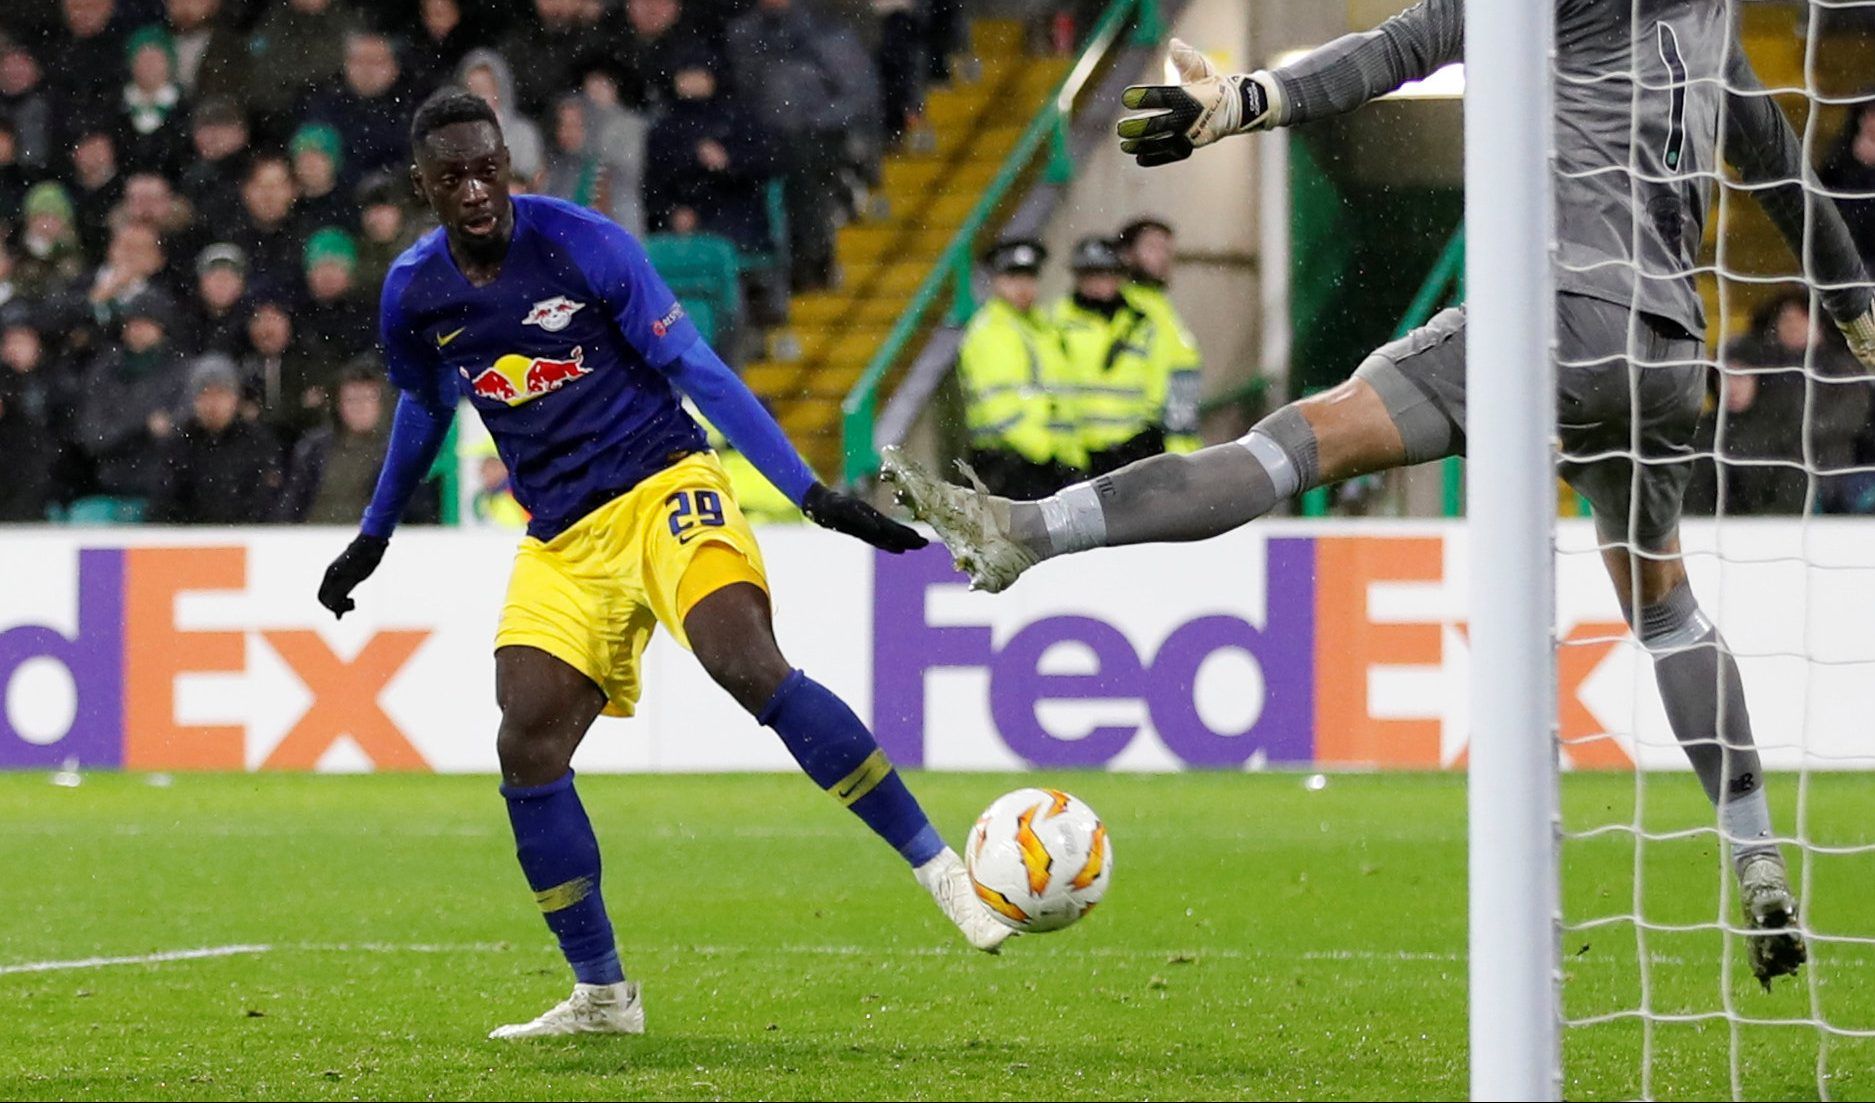 Soccer Football - Europa League - Group Stage - Group B - Celtic v RB Leipzig - Celtic Park, Glasgow, Britain - November 8, 2018  RB Leipzig's Jean-Kevin Augustin scores their first goal   Action Images via Reuters/Carl Recine